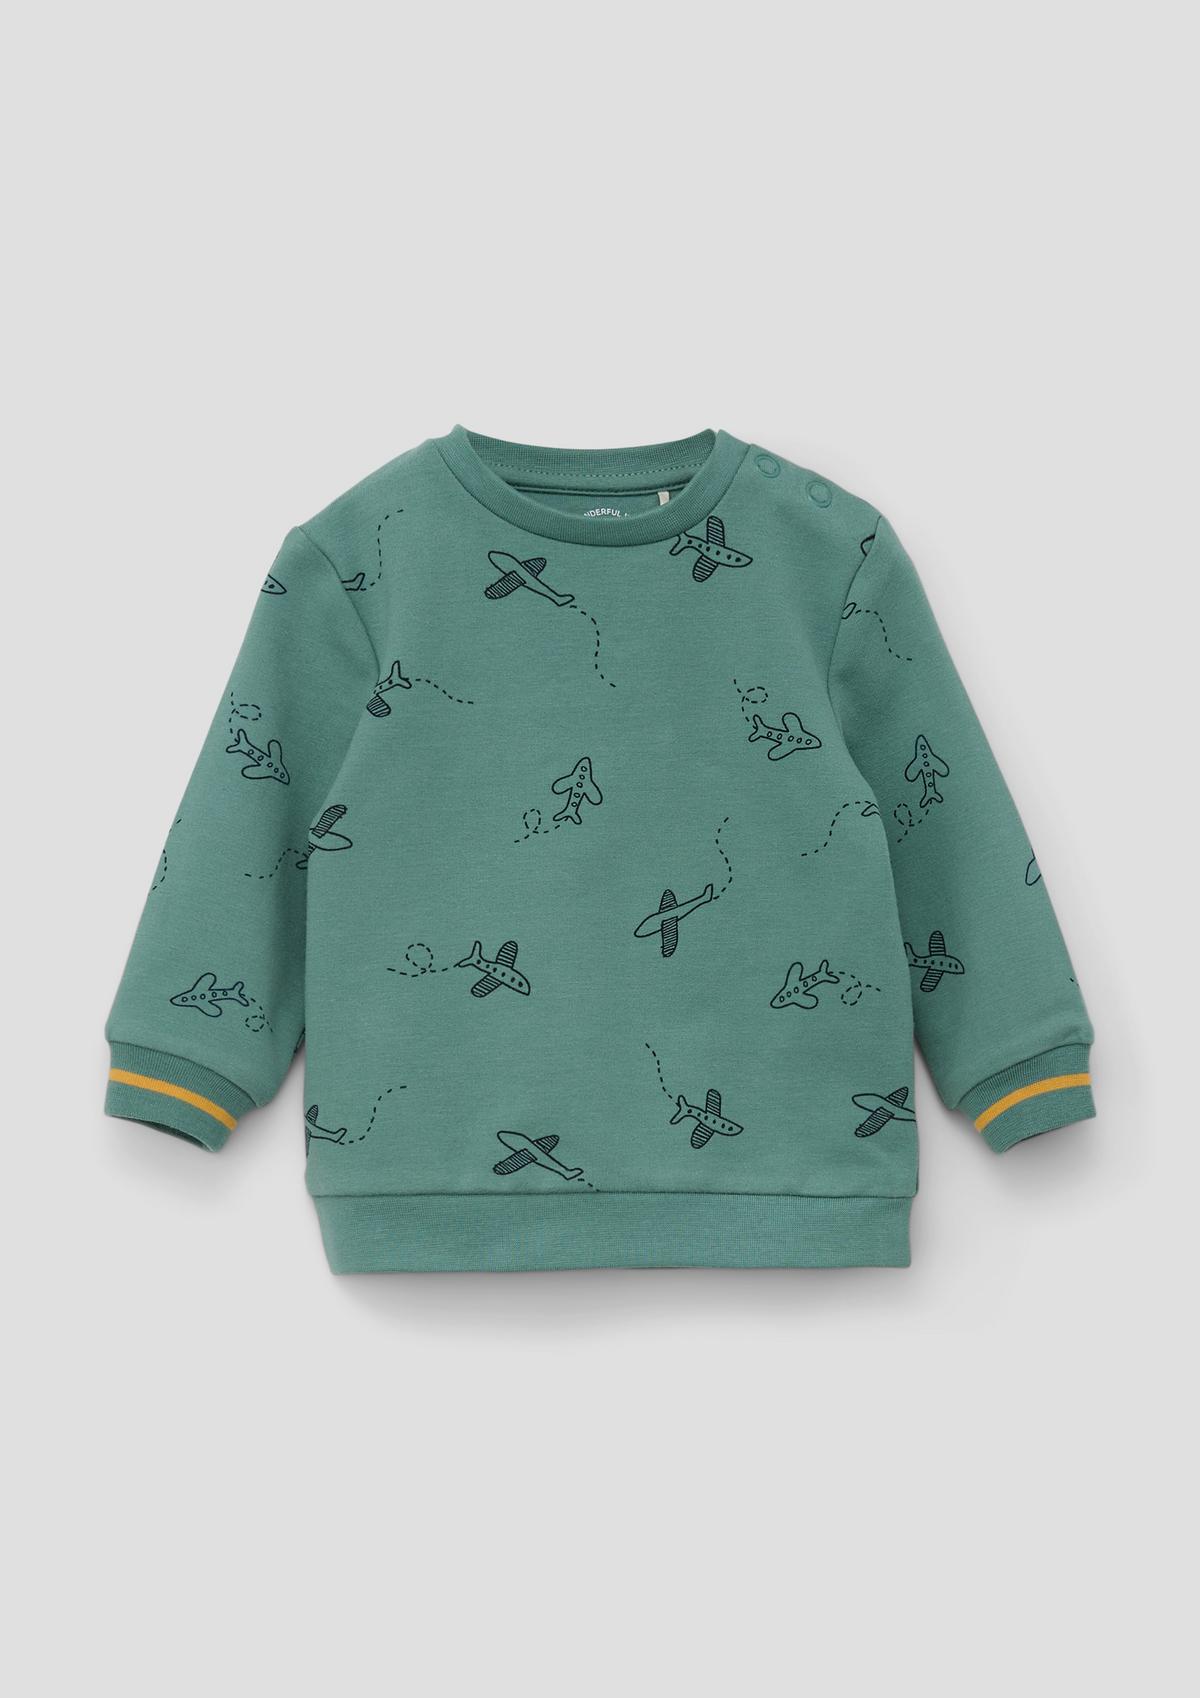 s.Oliver Sweatshirt with a check pattern